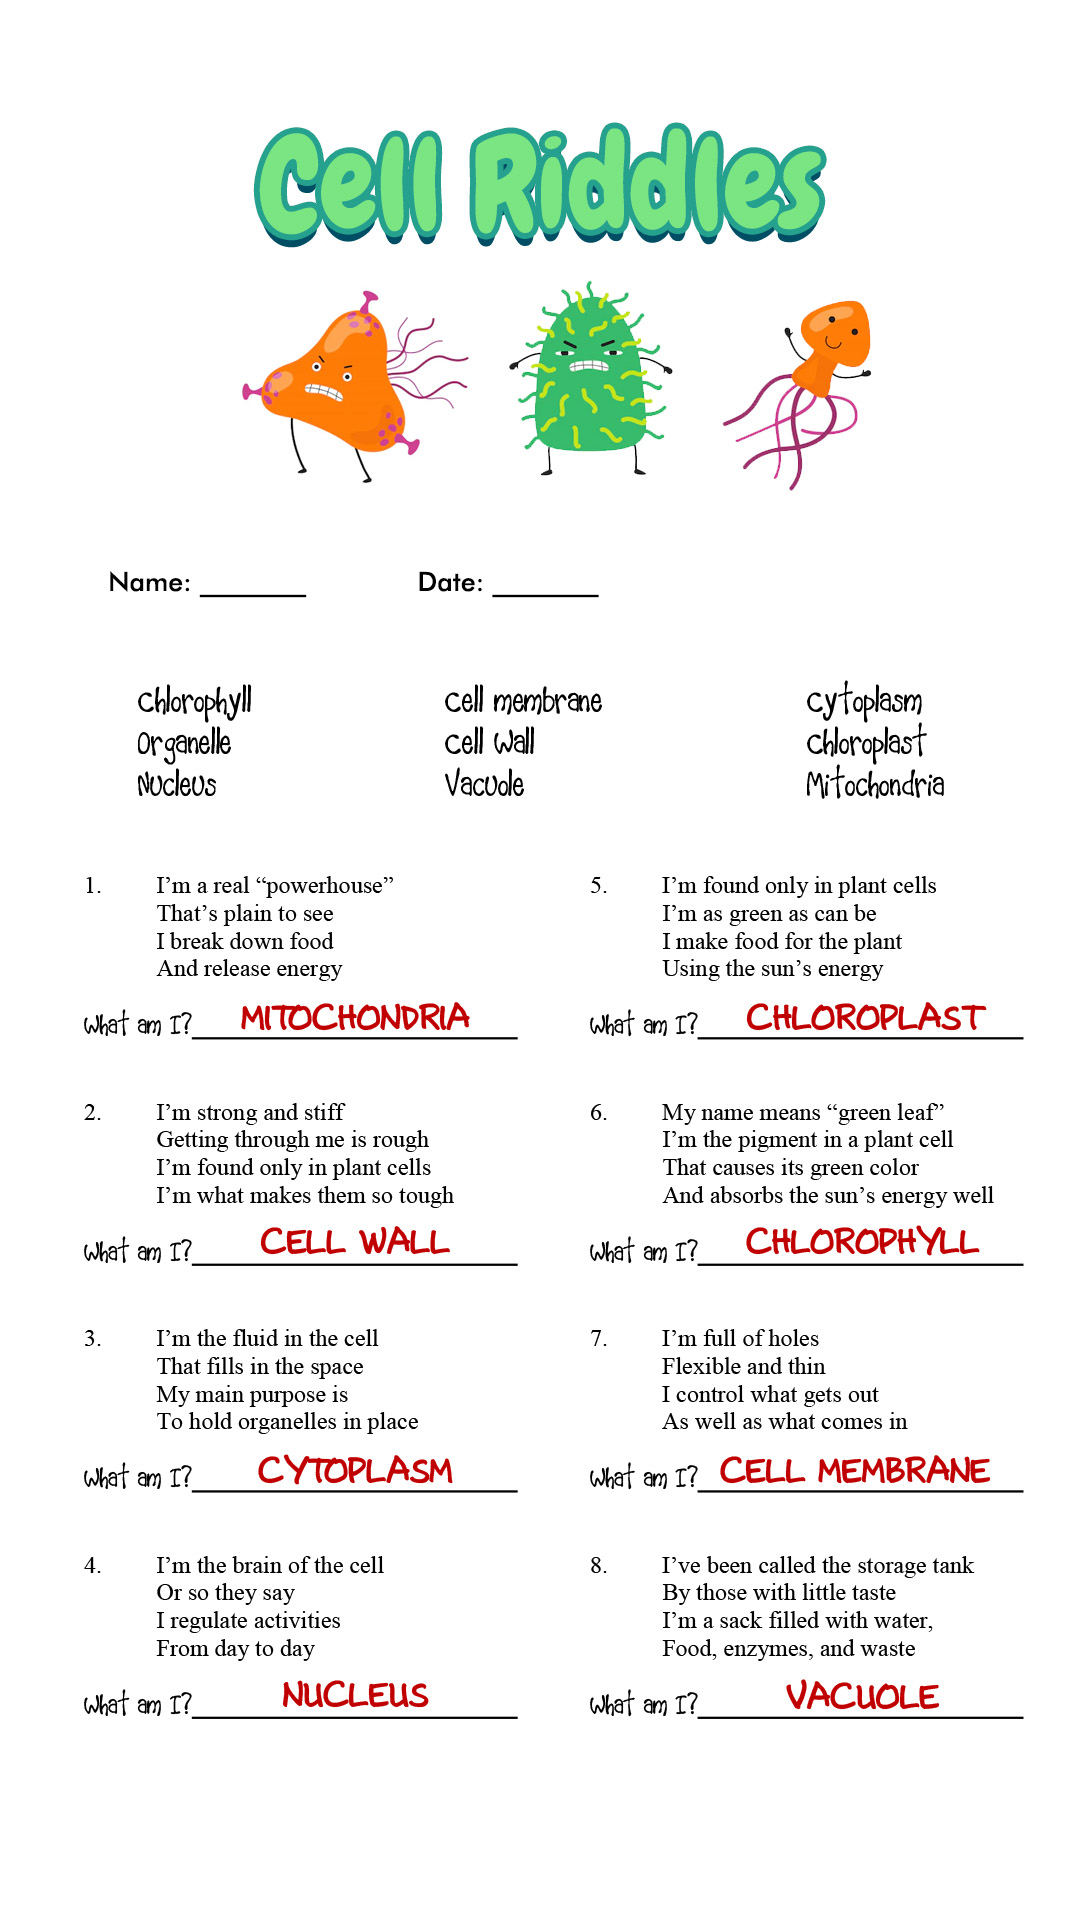 14-best-images-of-cell-organelle-riddles-worksheet-answers-cells-and-their-organelles